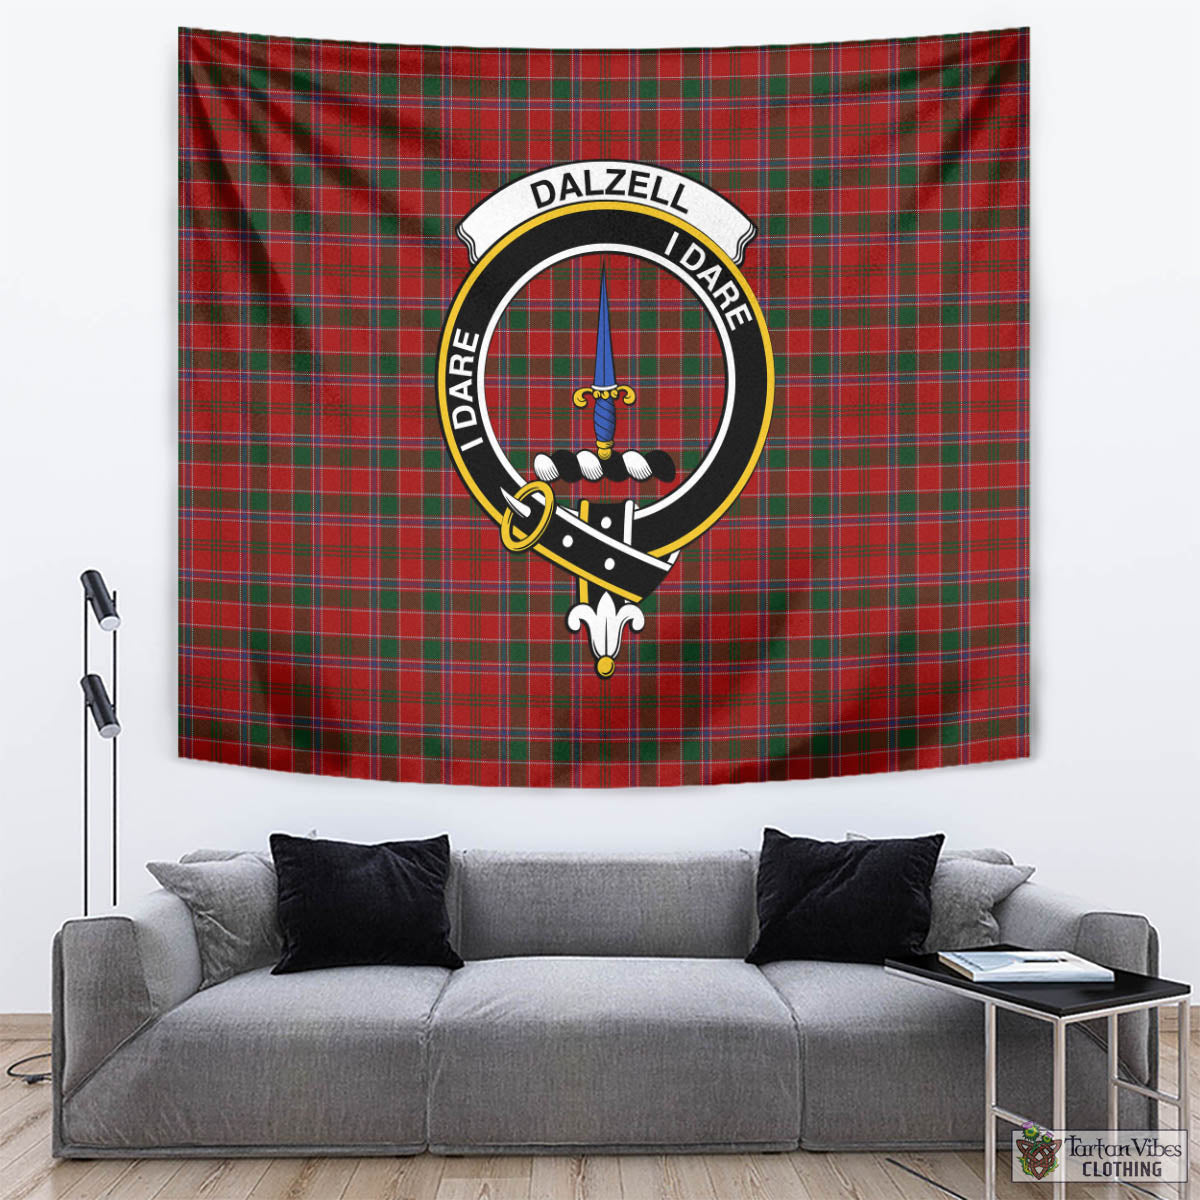 Tartan Vibes Clothing Dalzell (Dalziel) Tartan Tapestry Wall Hanging and Home Decor for Room with Family Crest